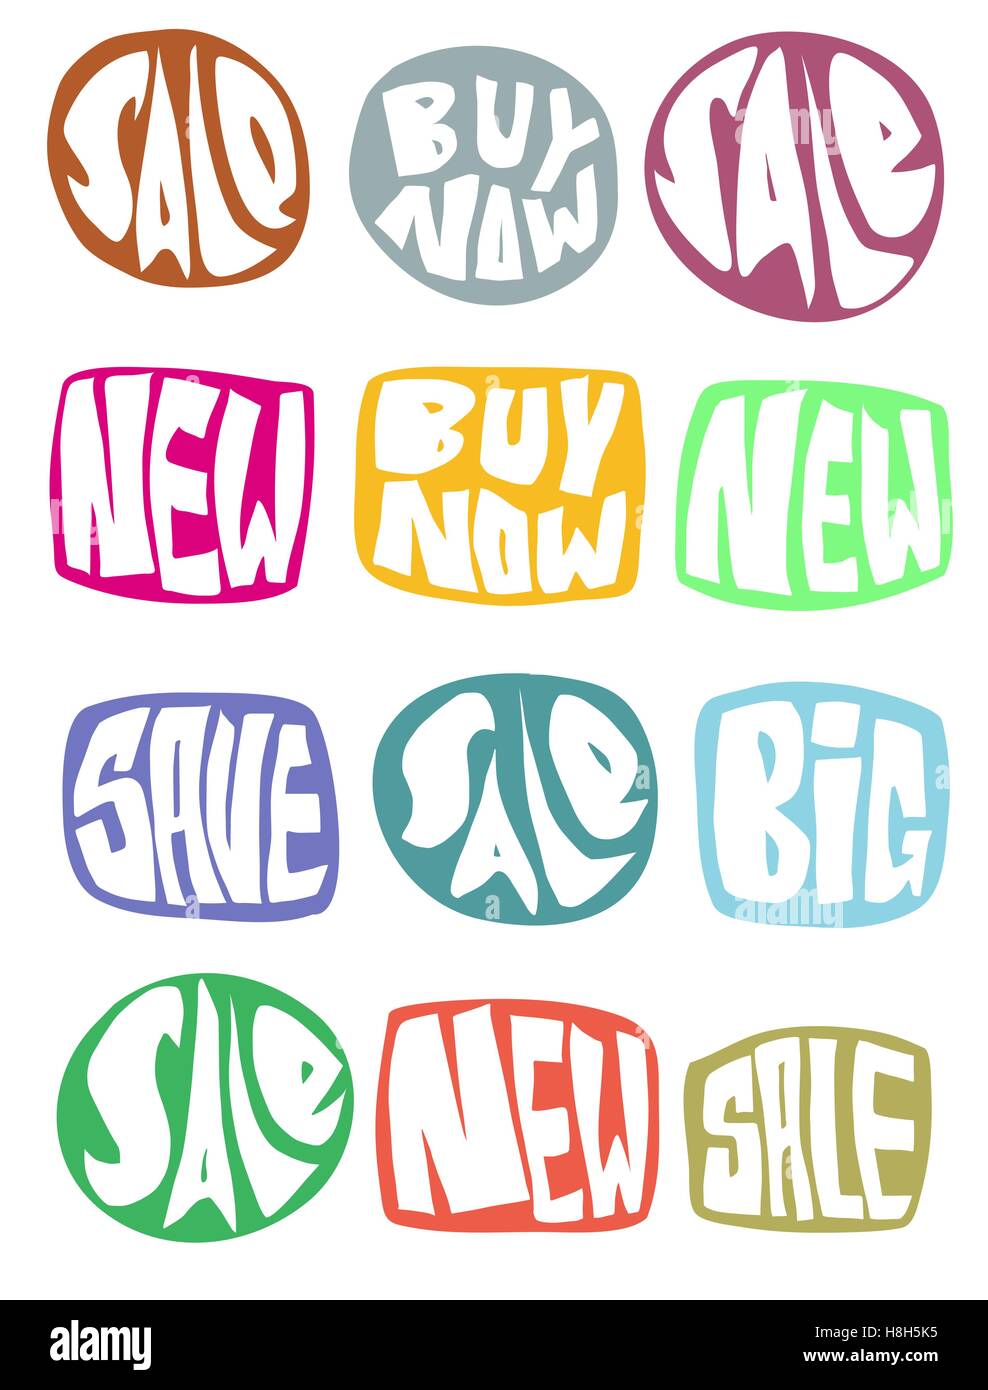 sale slogan button collection in multiple color over white Stock Vector